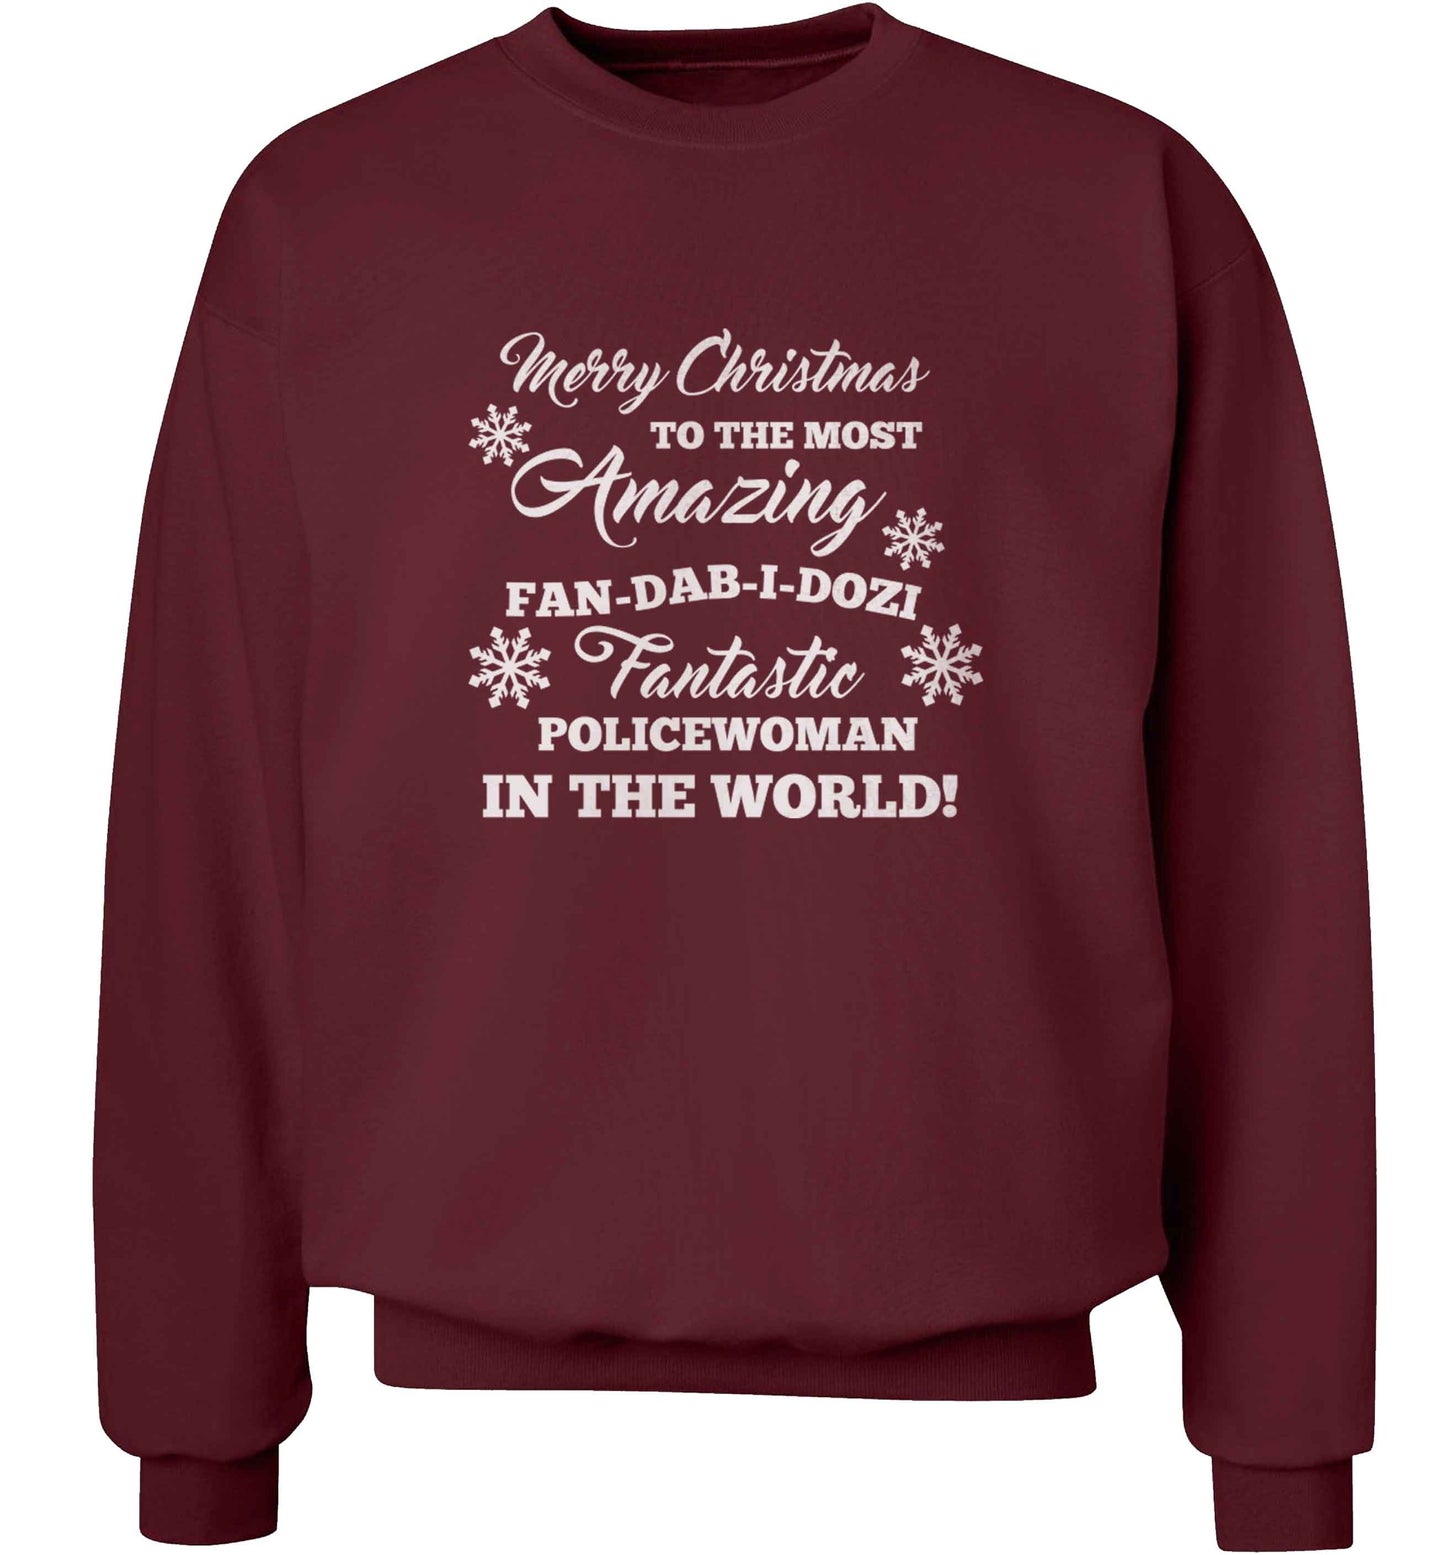 Merry Christmas to the most amazing policewoman in the world! adult's unisex maroon sweater 2XL